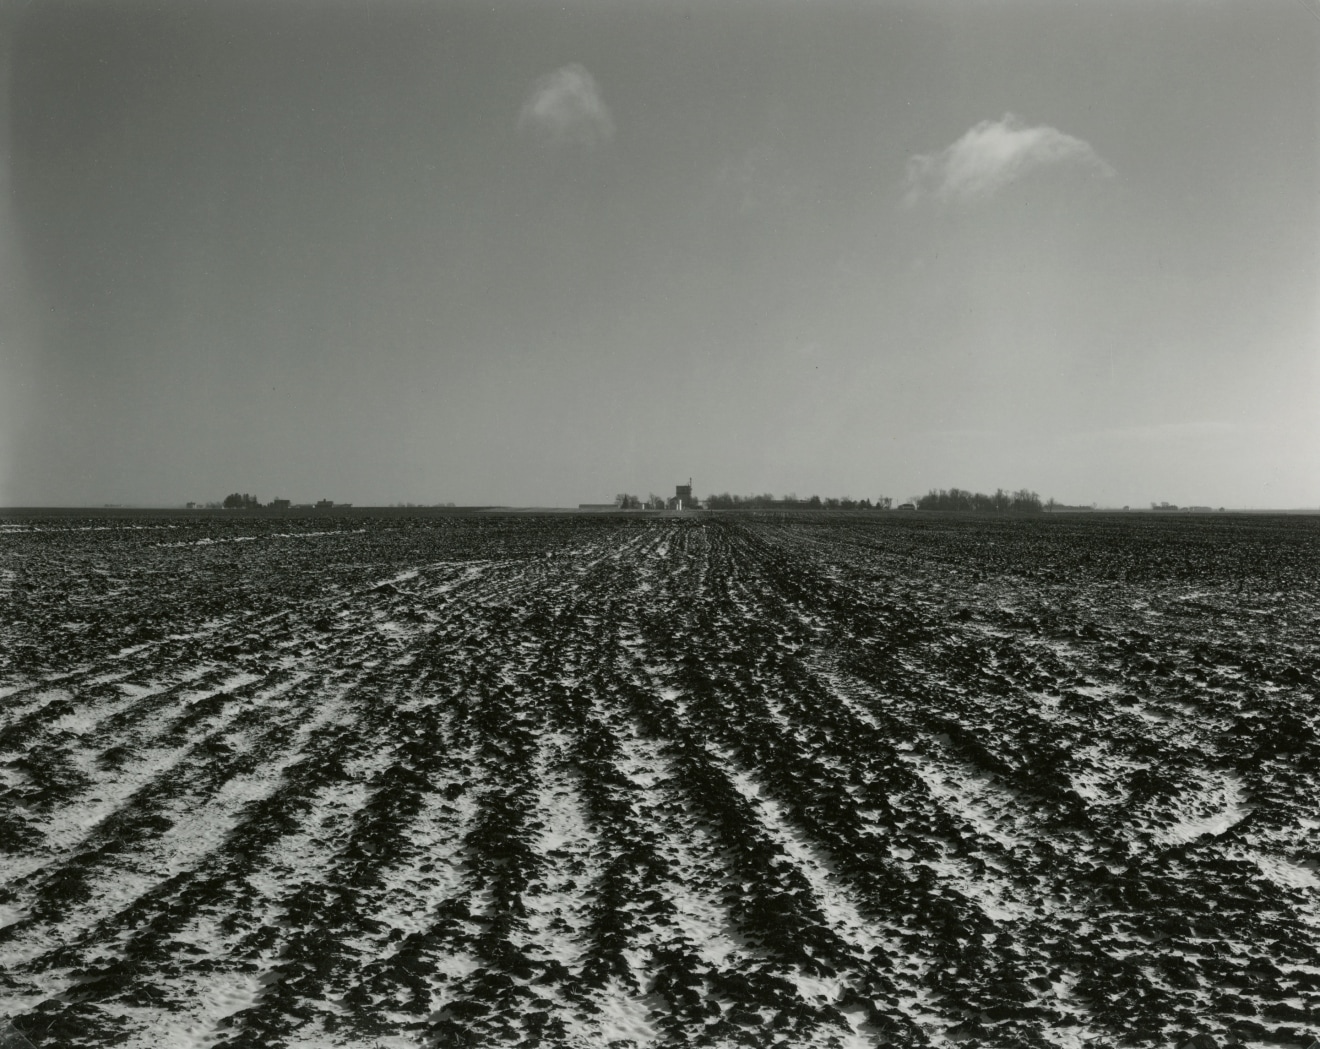 Untitled, from Farm Landscapes, 1987, gelatin silver contact print, 8 x 10 inches